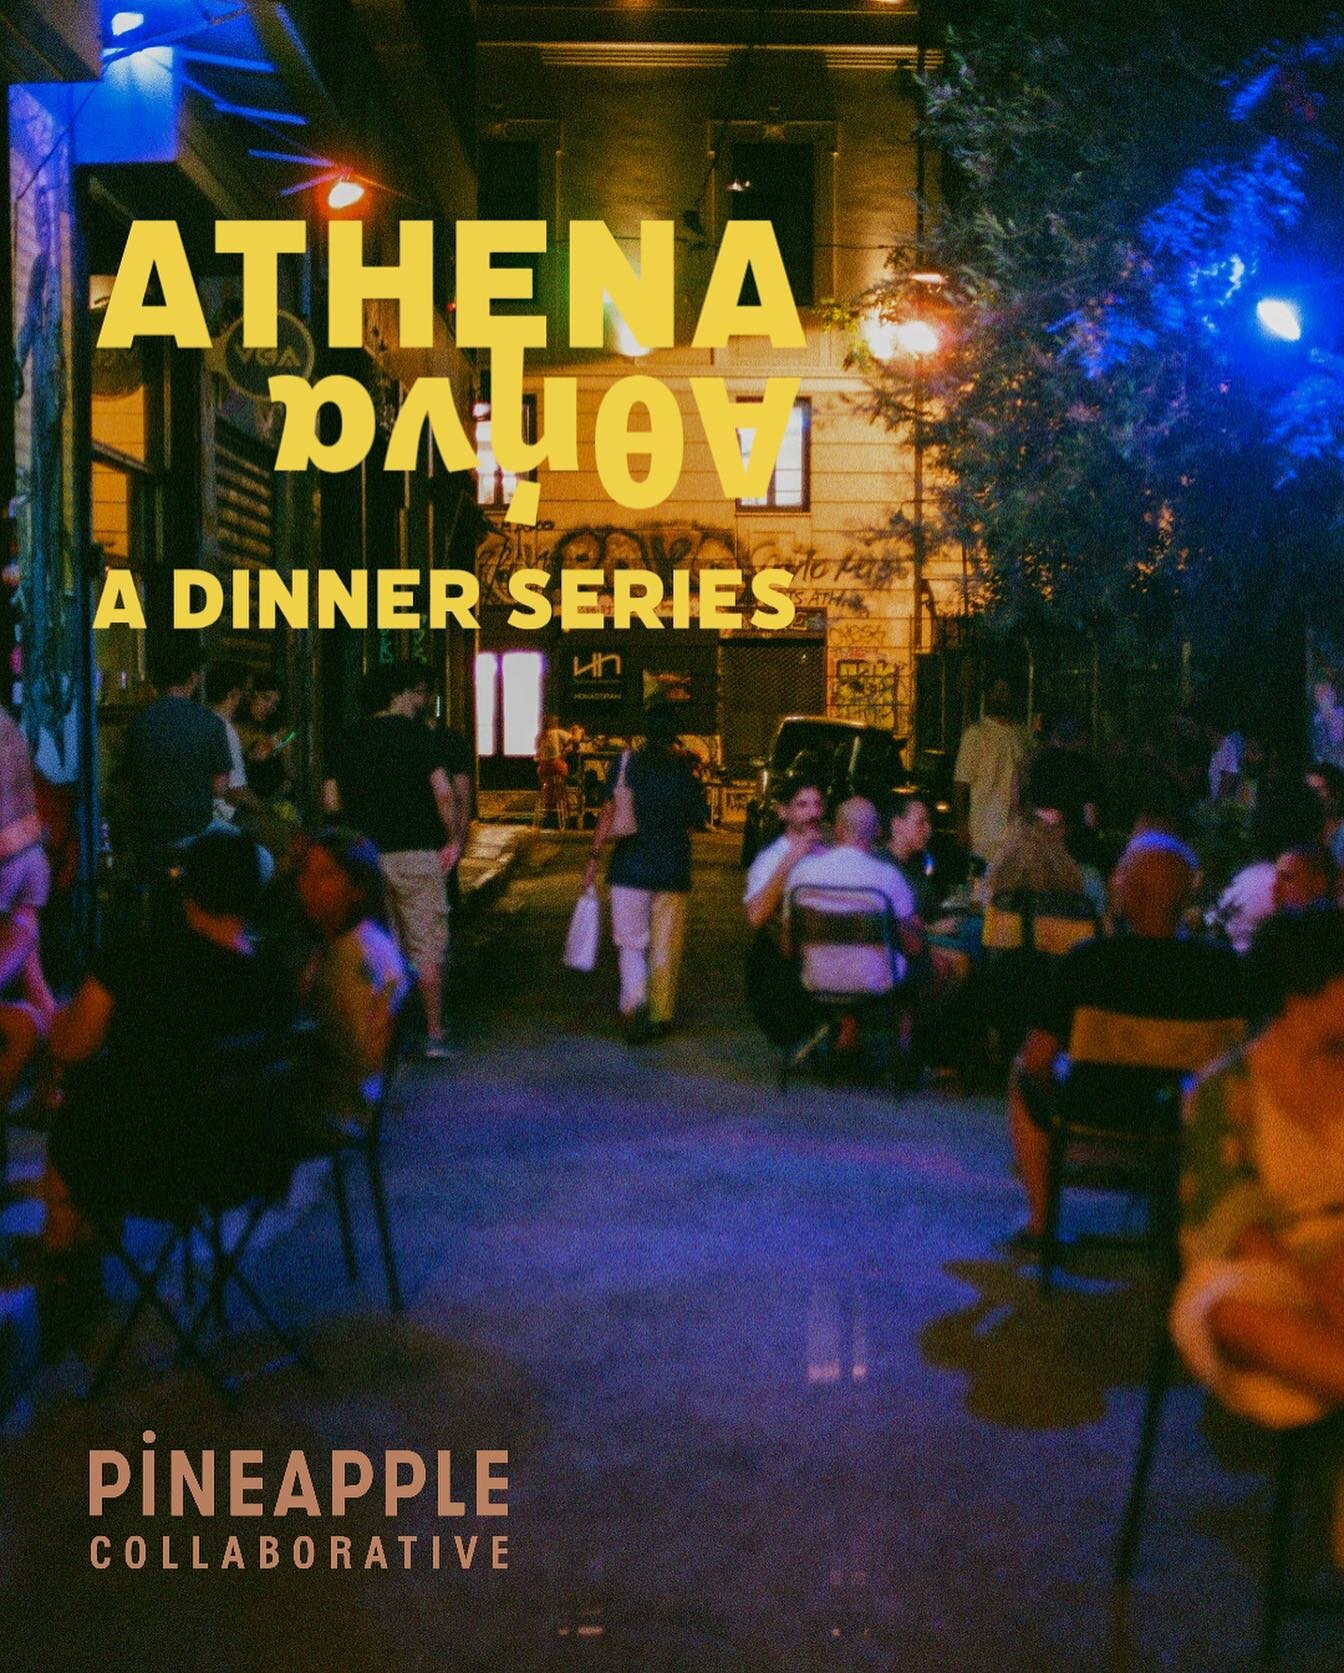 You wouldn't know it from the weather in LA, but it is summer! Join us for this month's @athenadinners as we tiptoe into summer with recipes from my new mini cookbook FRY DAY, &sigma;&tau;&eta;&nu; &Epsilon;&lambda;&lambda;ά&delta;&alpha;! 

Our dinn